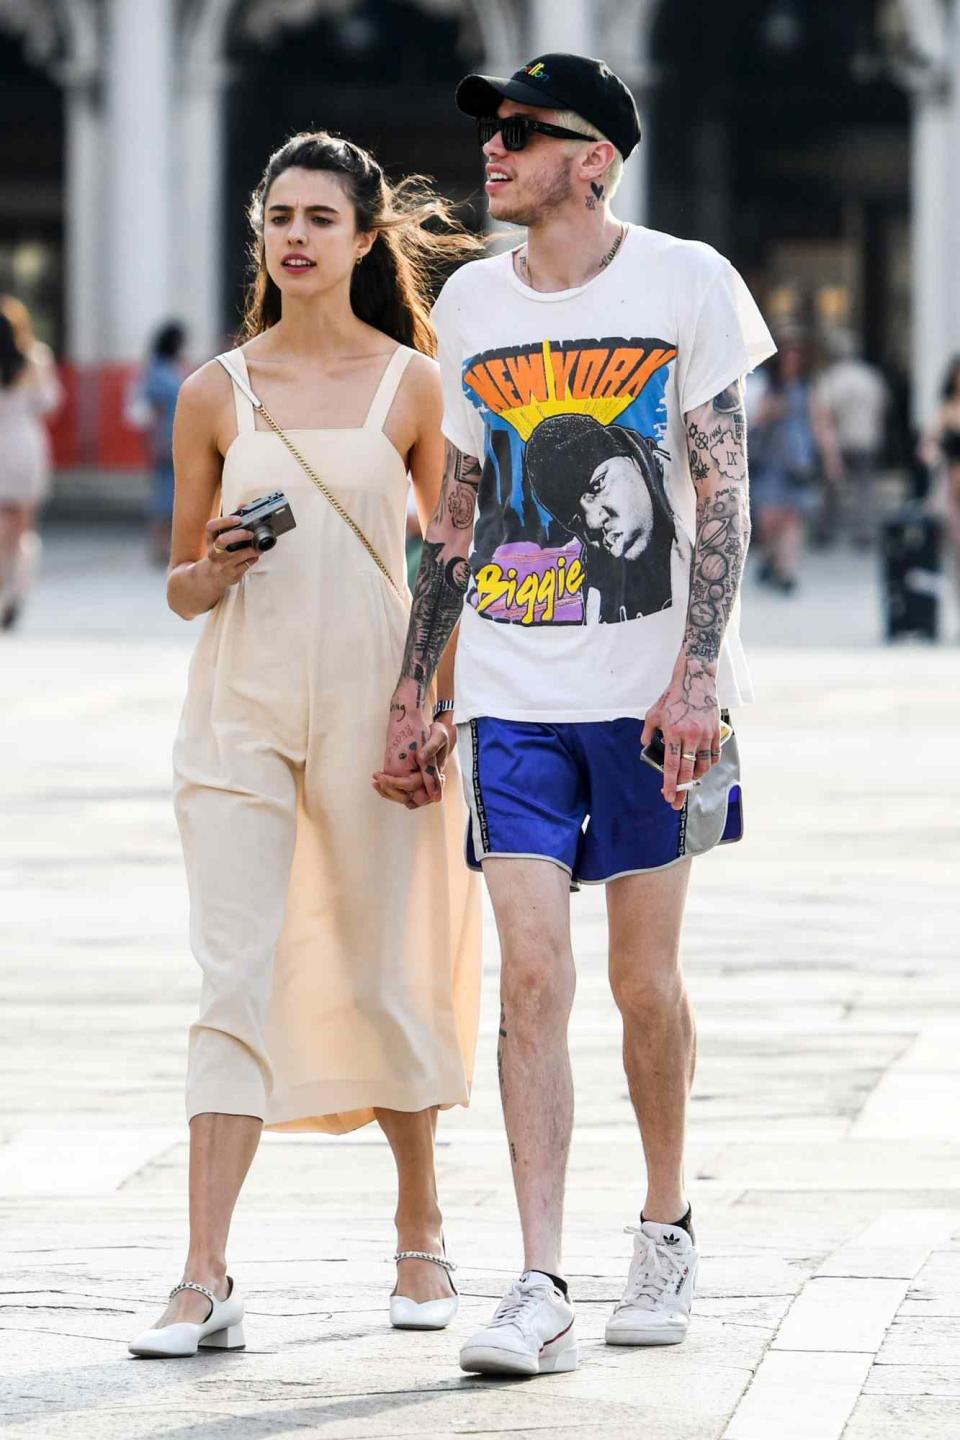 Pete Davidson and Margaret Qualley